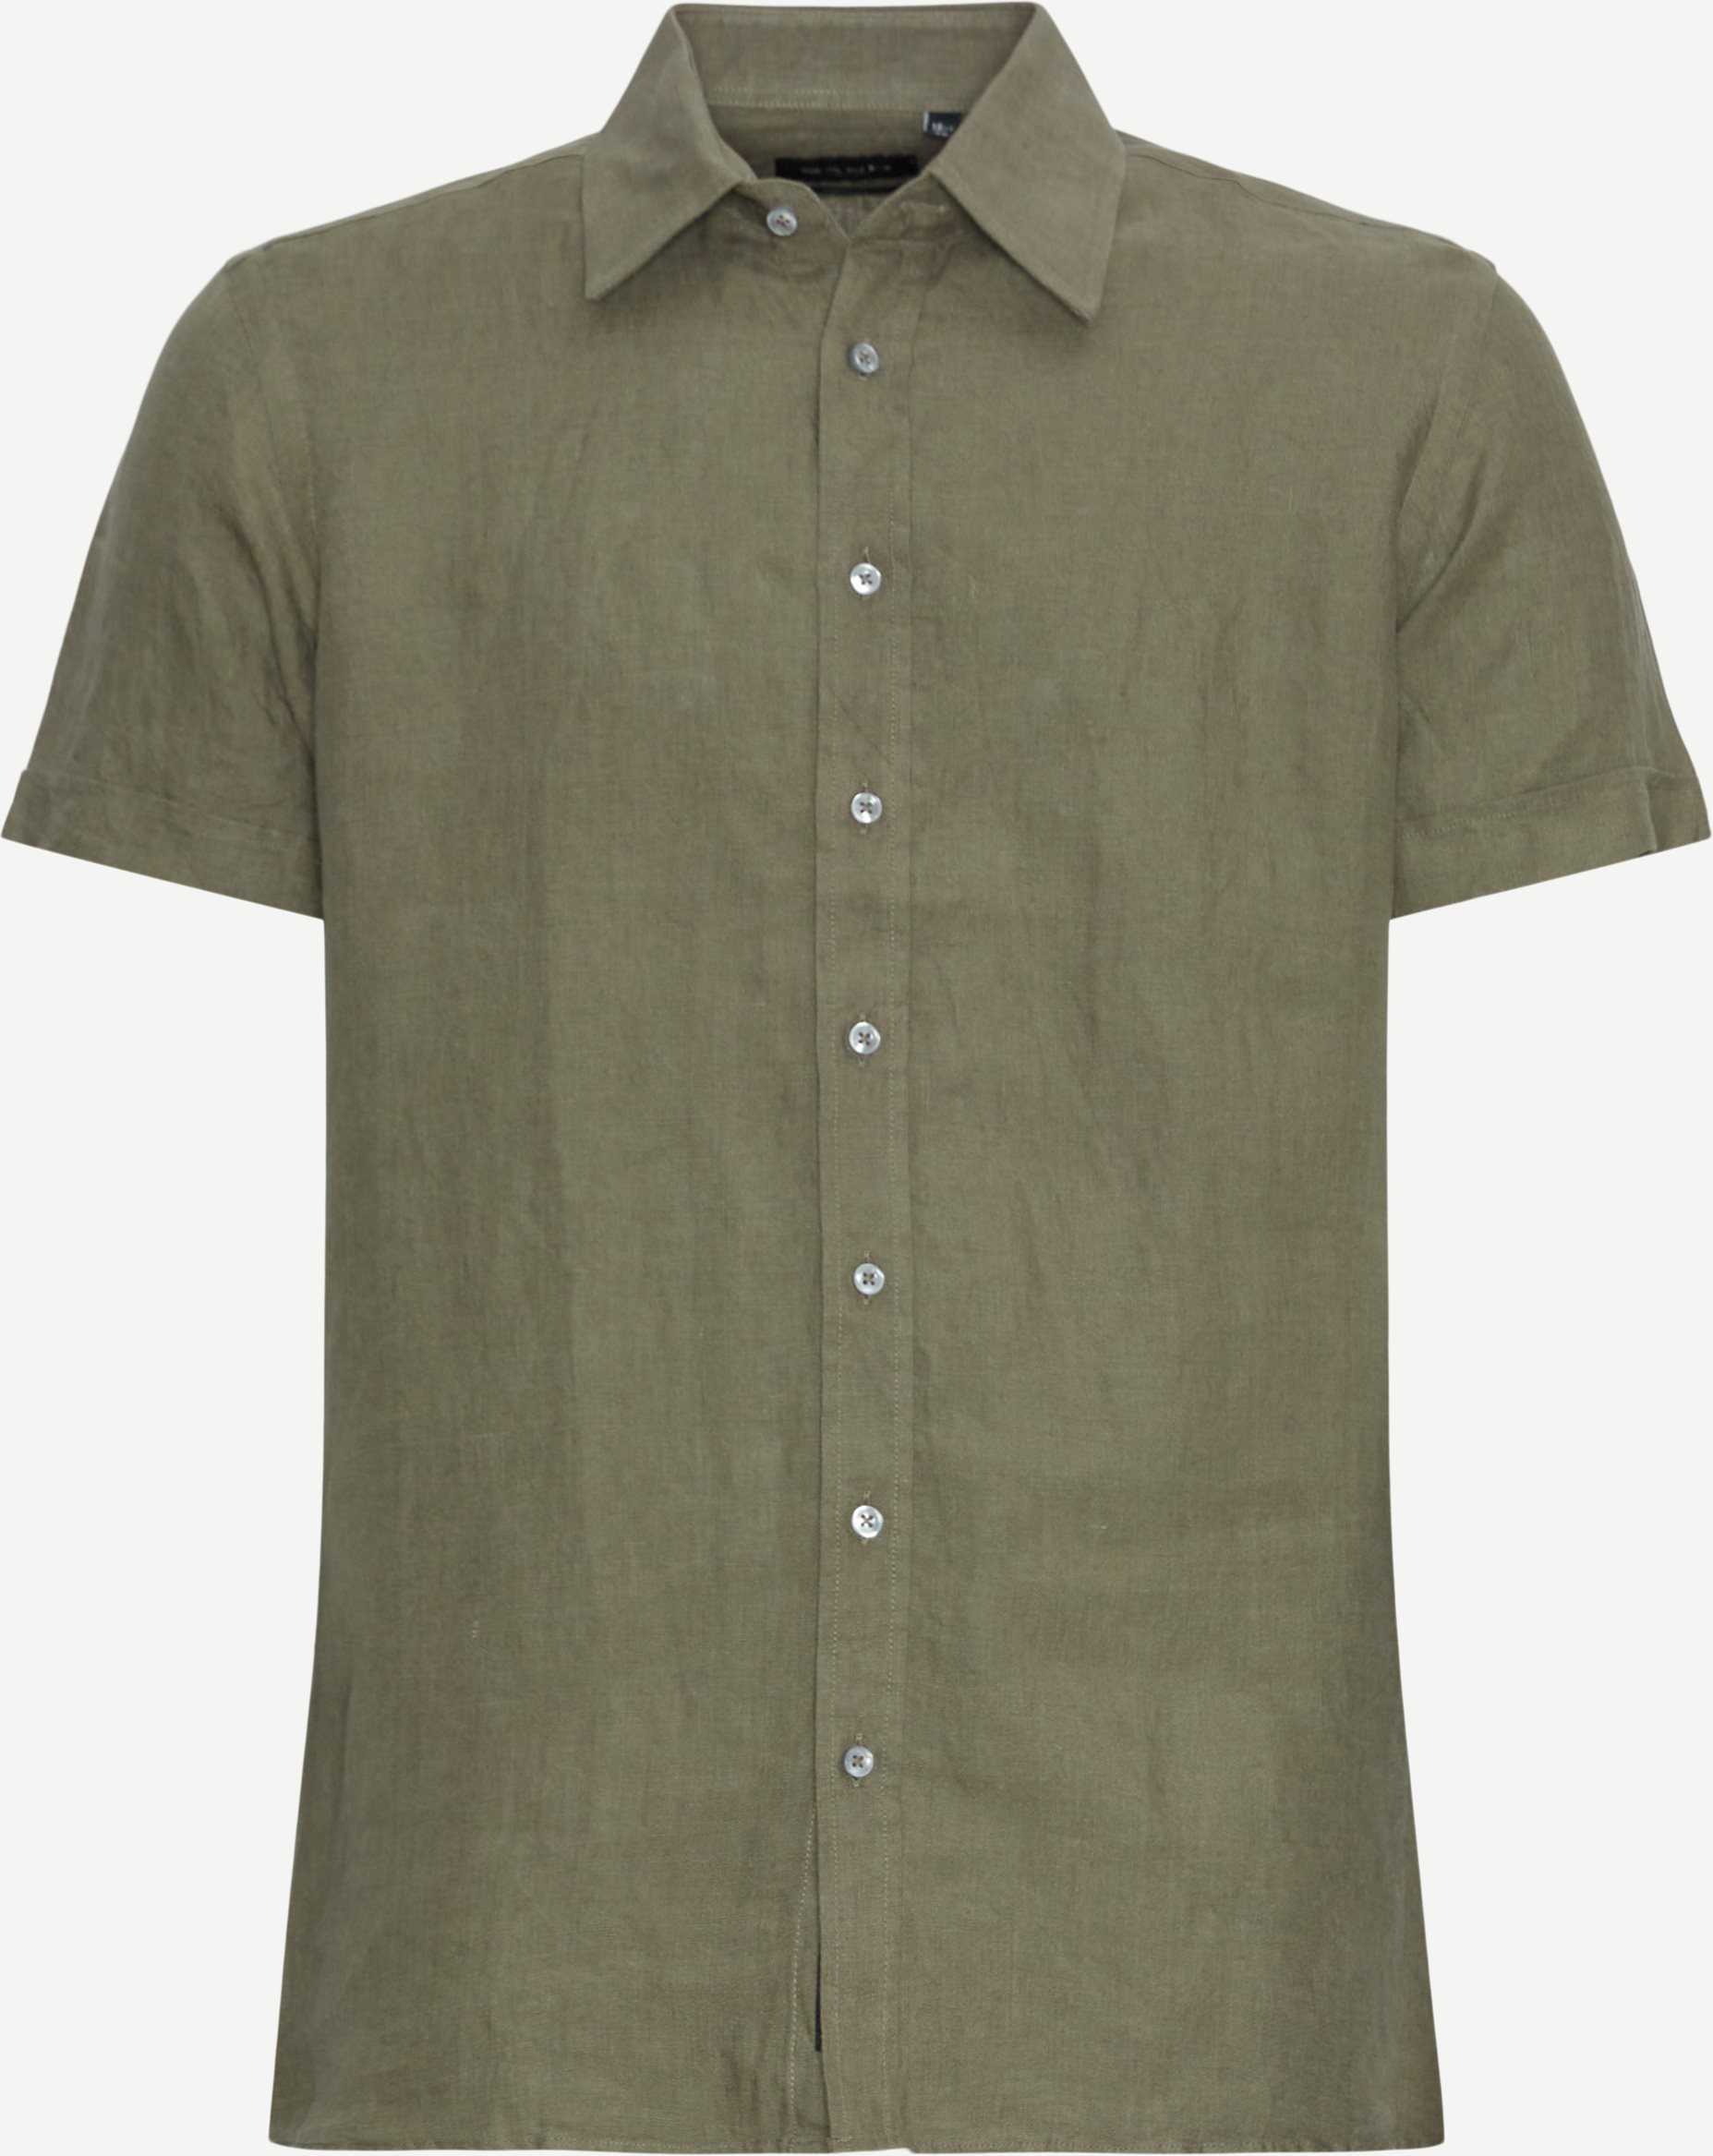 Sand Short-sleeved shirts 8823 STATE SOFT ST Army